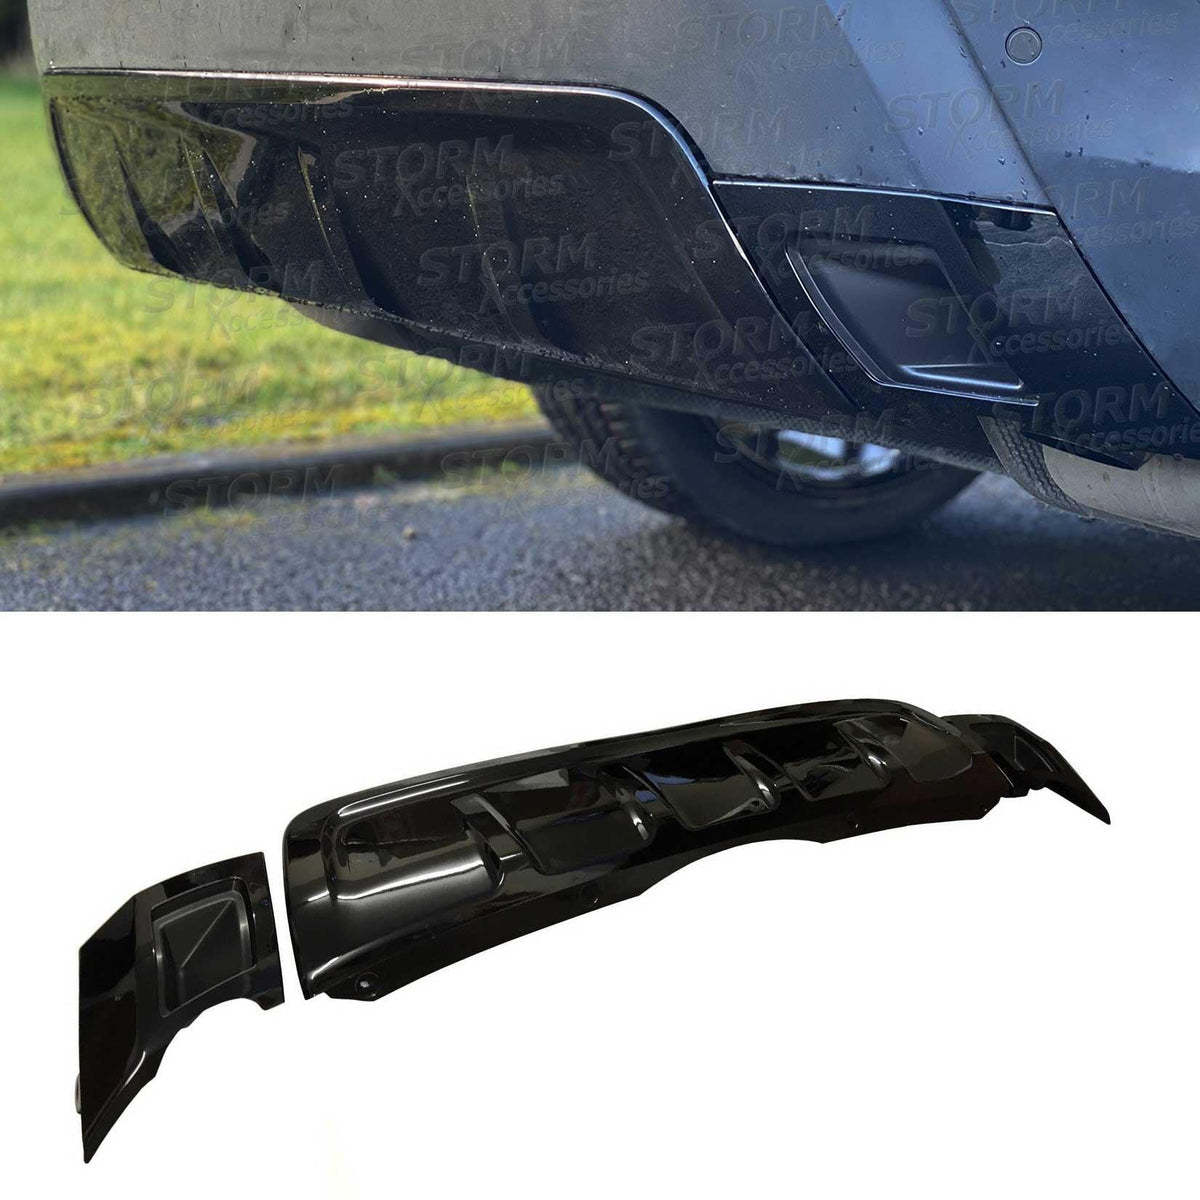 LAND ROVER DISCOVERY 5 2017 ON - REAR BUMPER TOW EYE COVER - EXHAUST TRIMS COVERS - DYNAMIC - BLACK - Storm Xccessories2